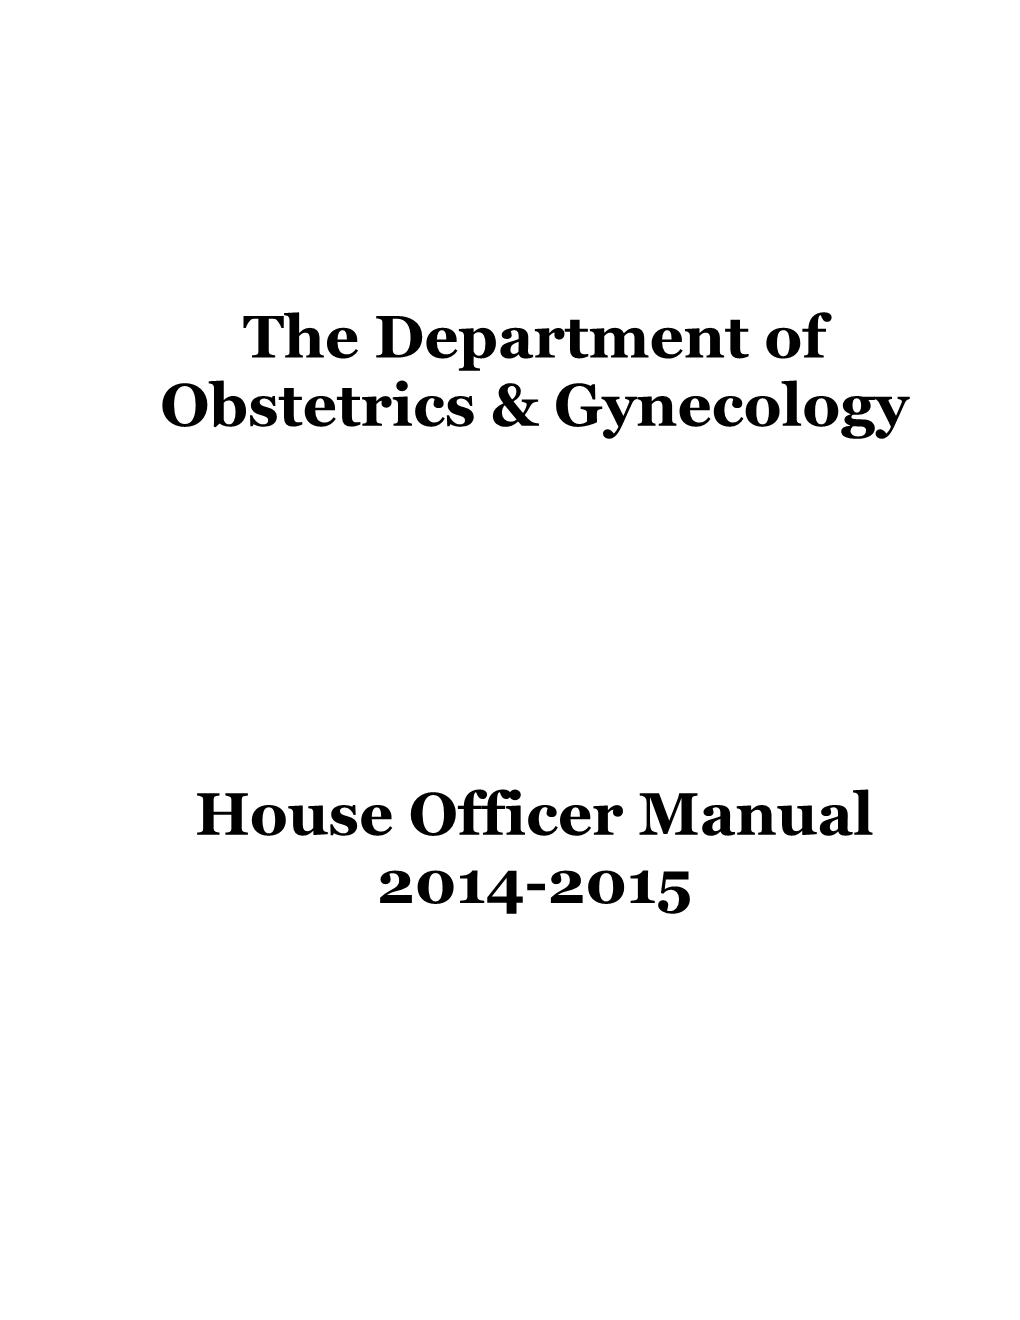 The Department of Obstetrics & Gynecology